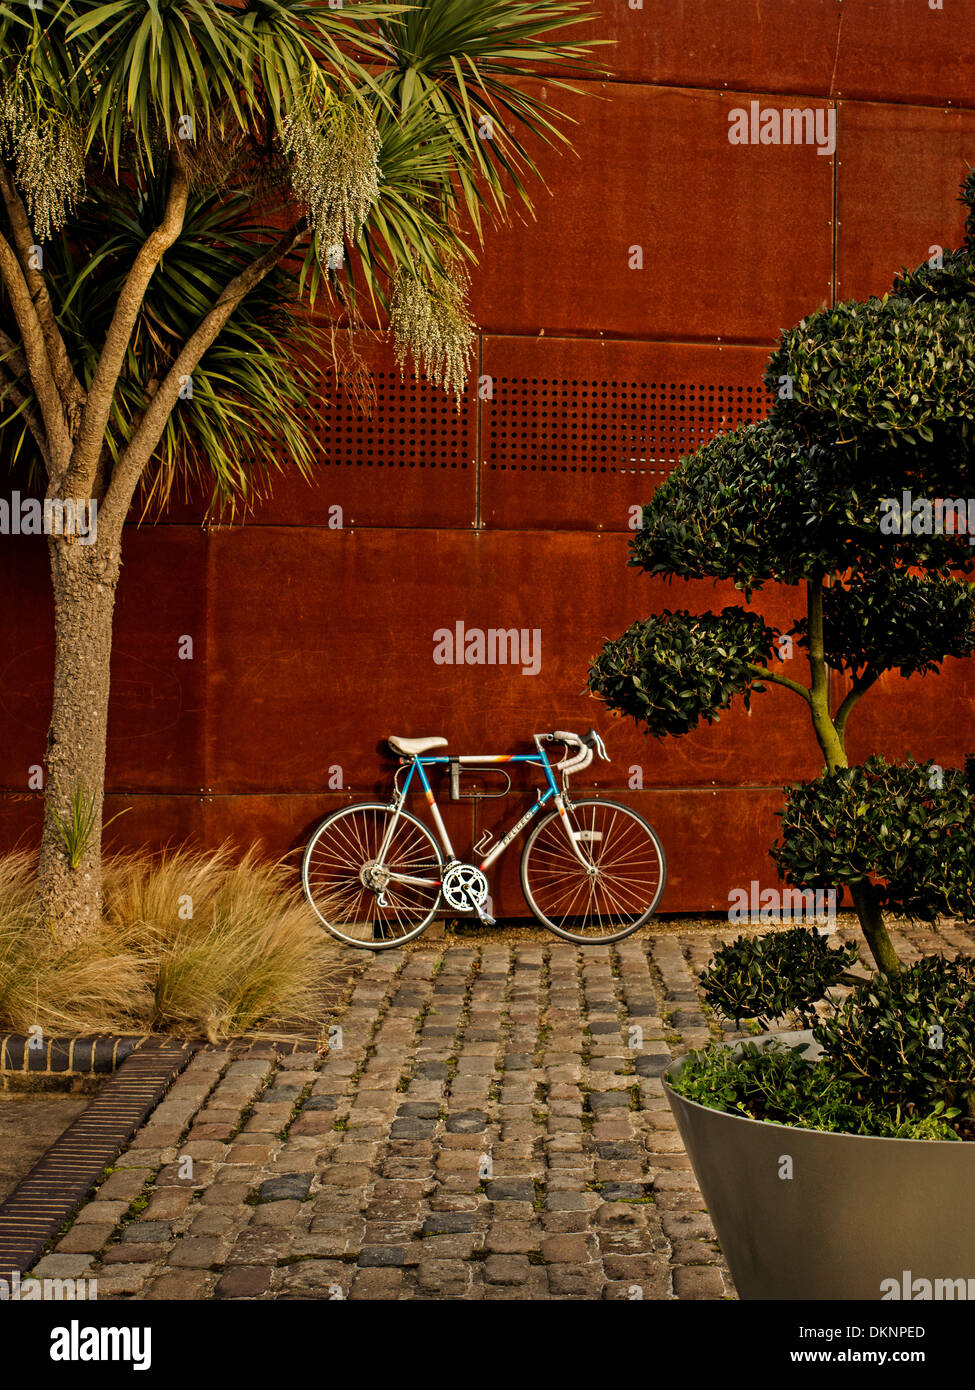 Racing bicycle against a wall in tropical garden design Stock Photo